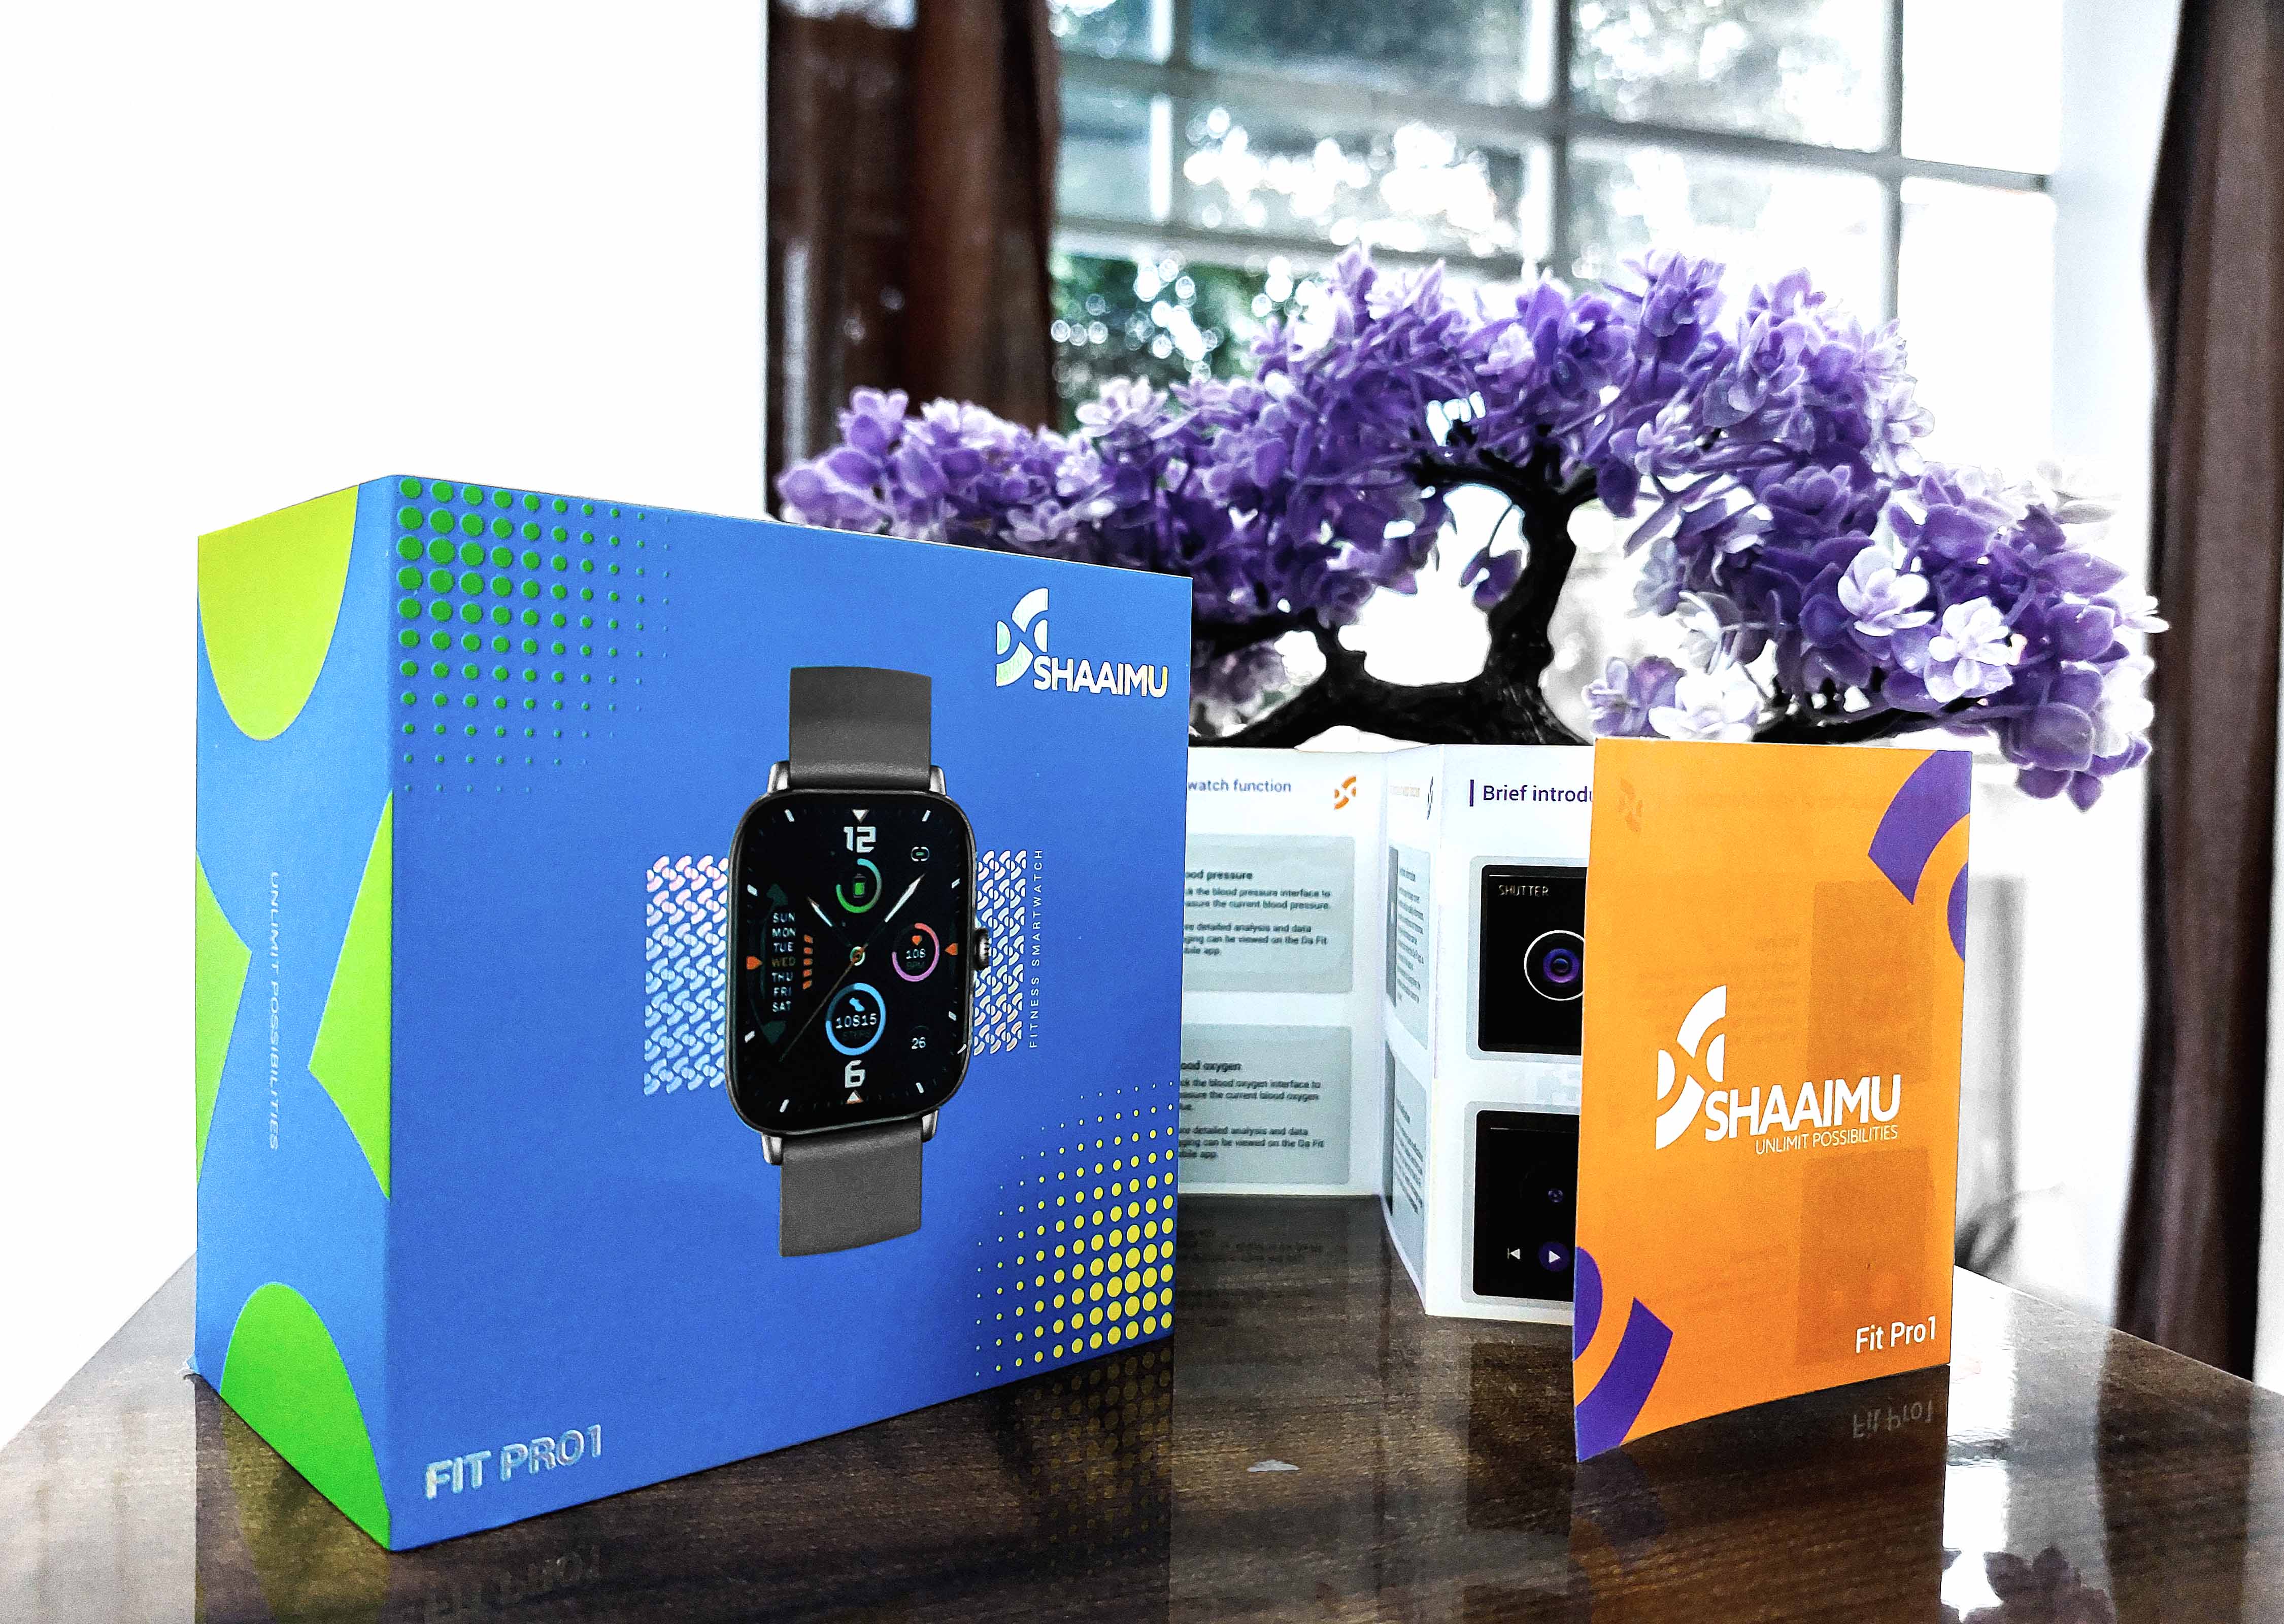 Branding And Packaging Design Of Shaaimu Smart Watches